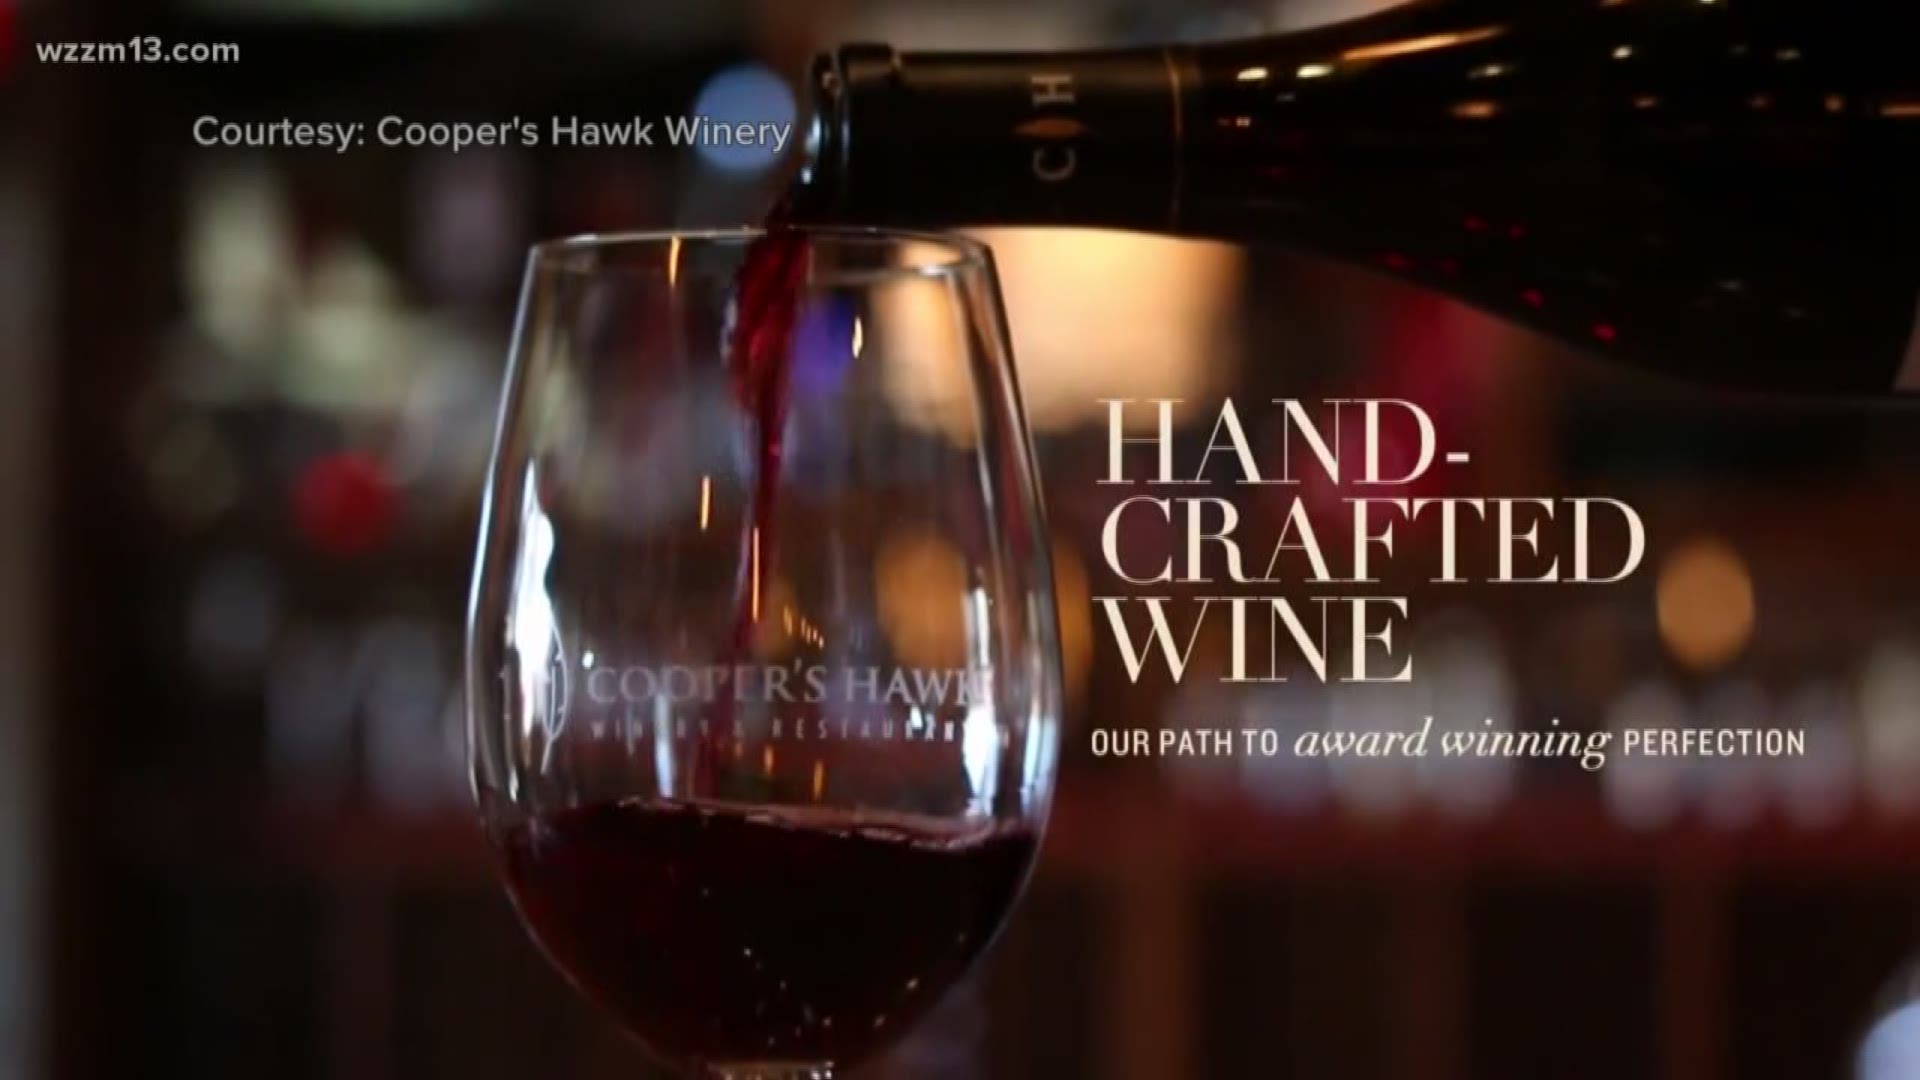 Wine-lovers in West Michigan will soon have a place to sample different wines. Cooper's Hawk Winery and Restaurant chain out of Chicago is working on a 28th Street location!